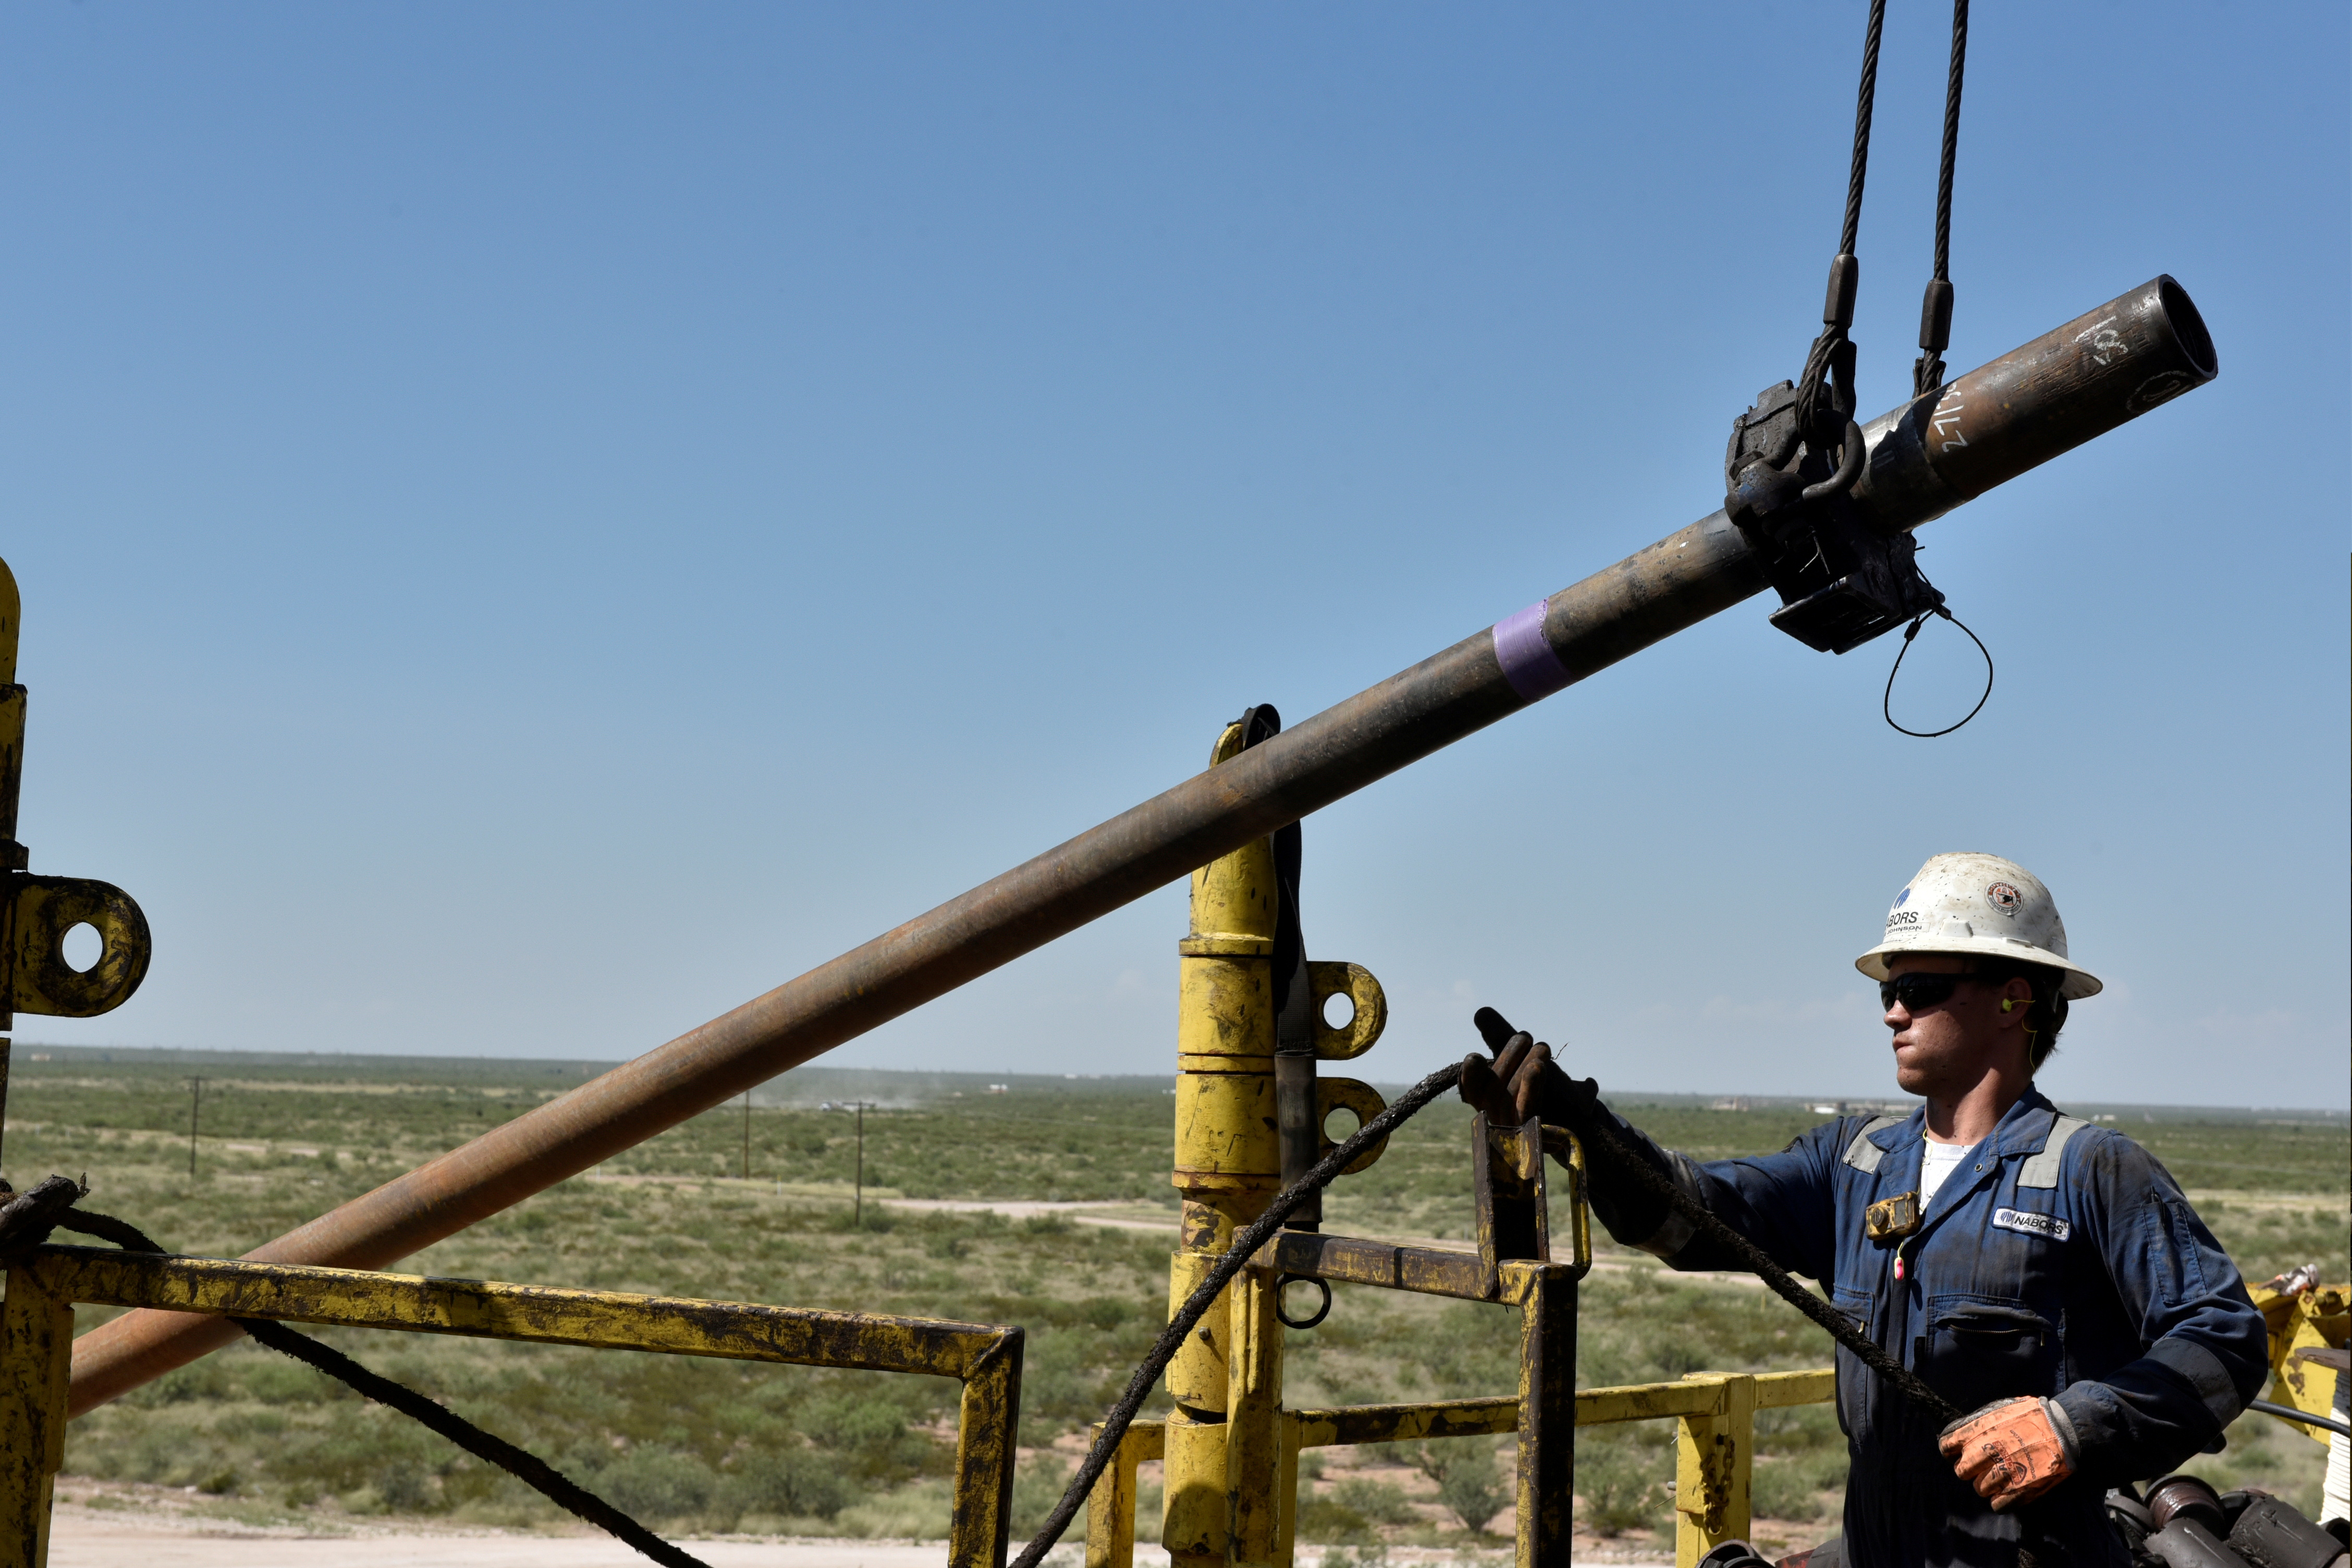 A drilling crew member raises drill pipe onto the drilling rig floor on an oil rig in the Permian Basin near Wink